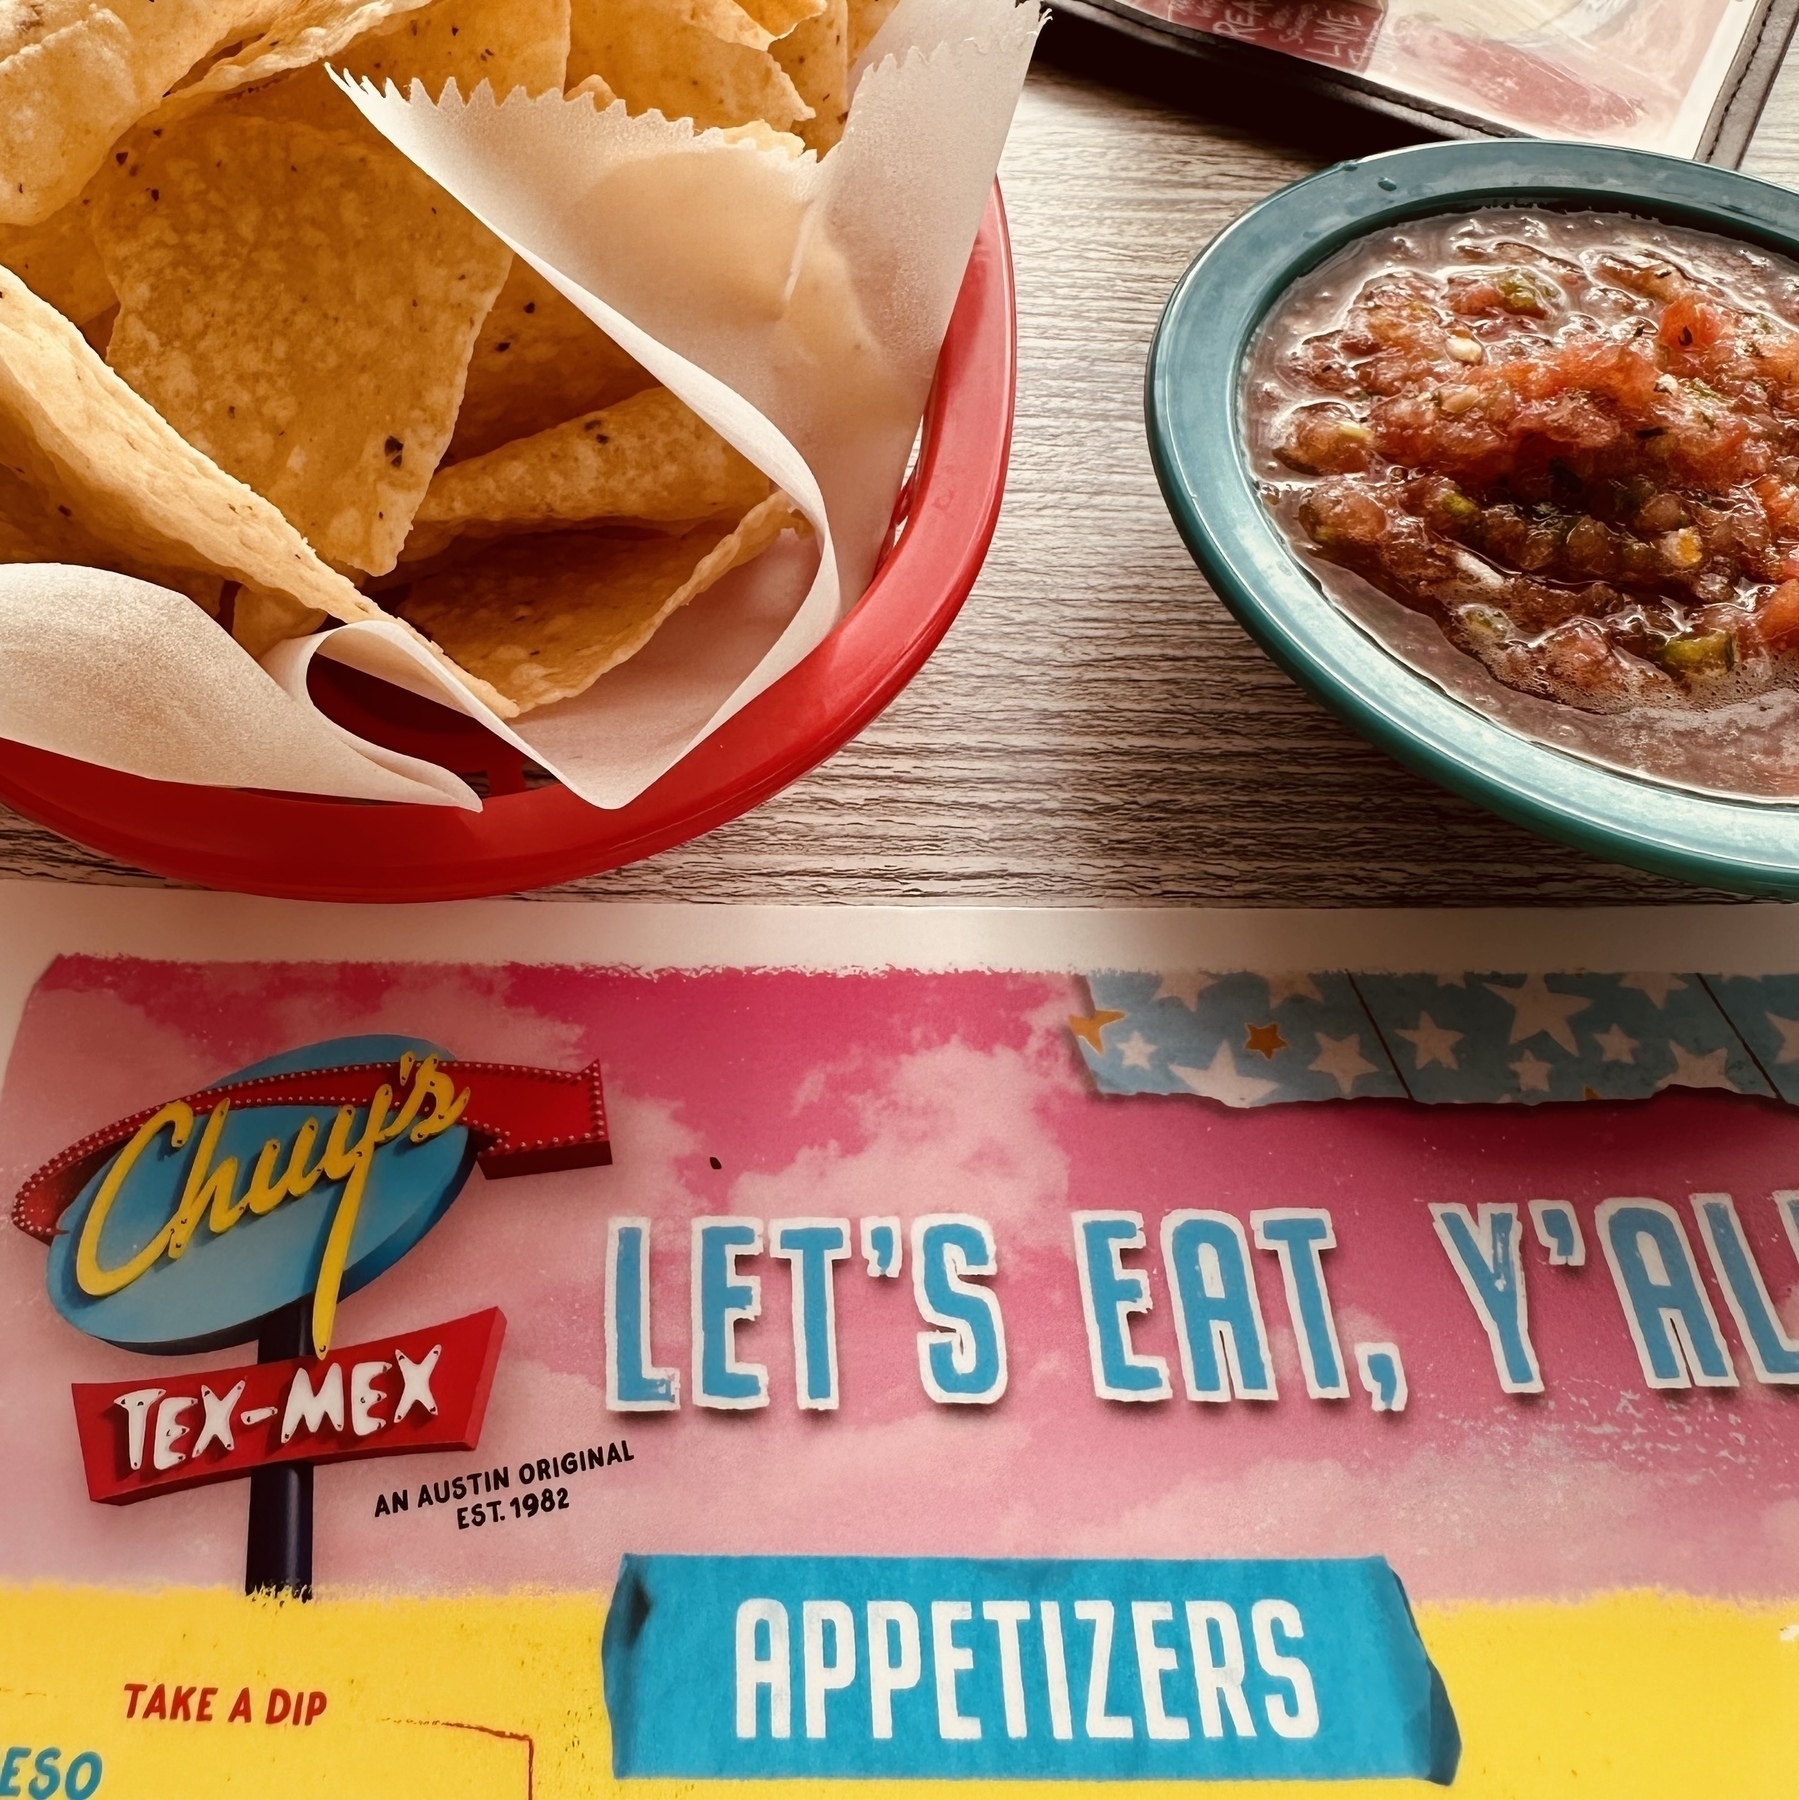 A bowl of salsa and a basket of tortilla chips, with the Chuy’s menu that says Let’s Eat, Y’all.